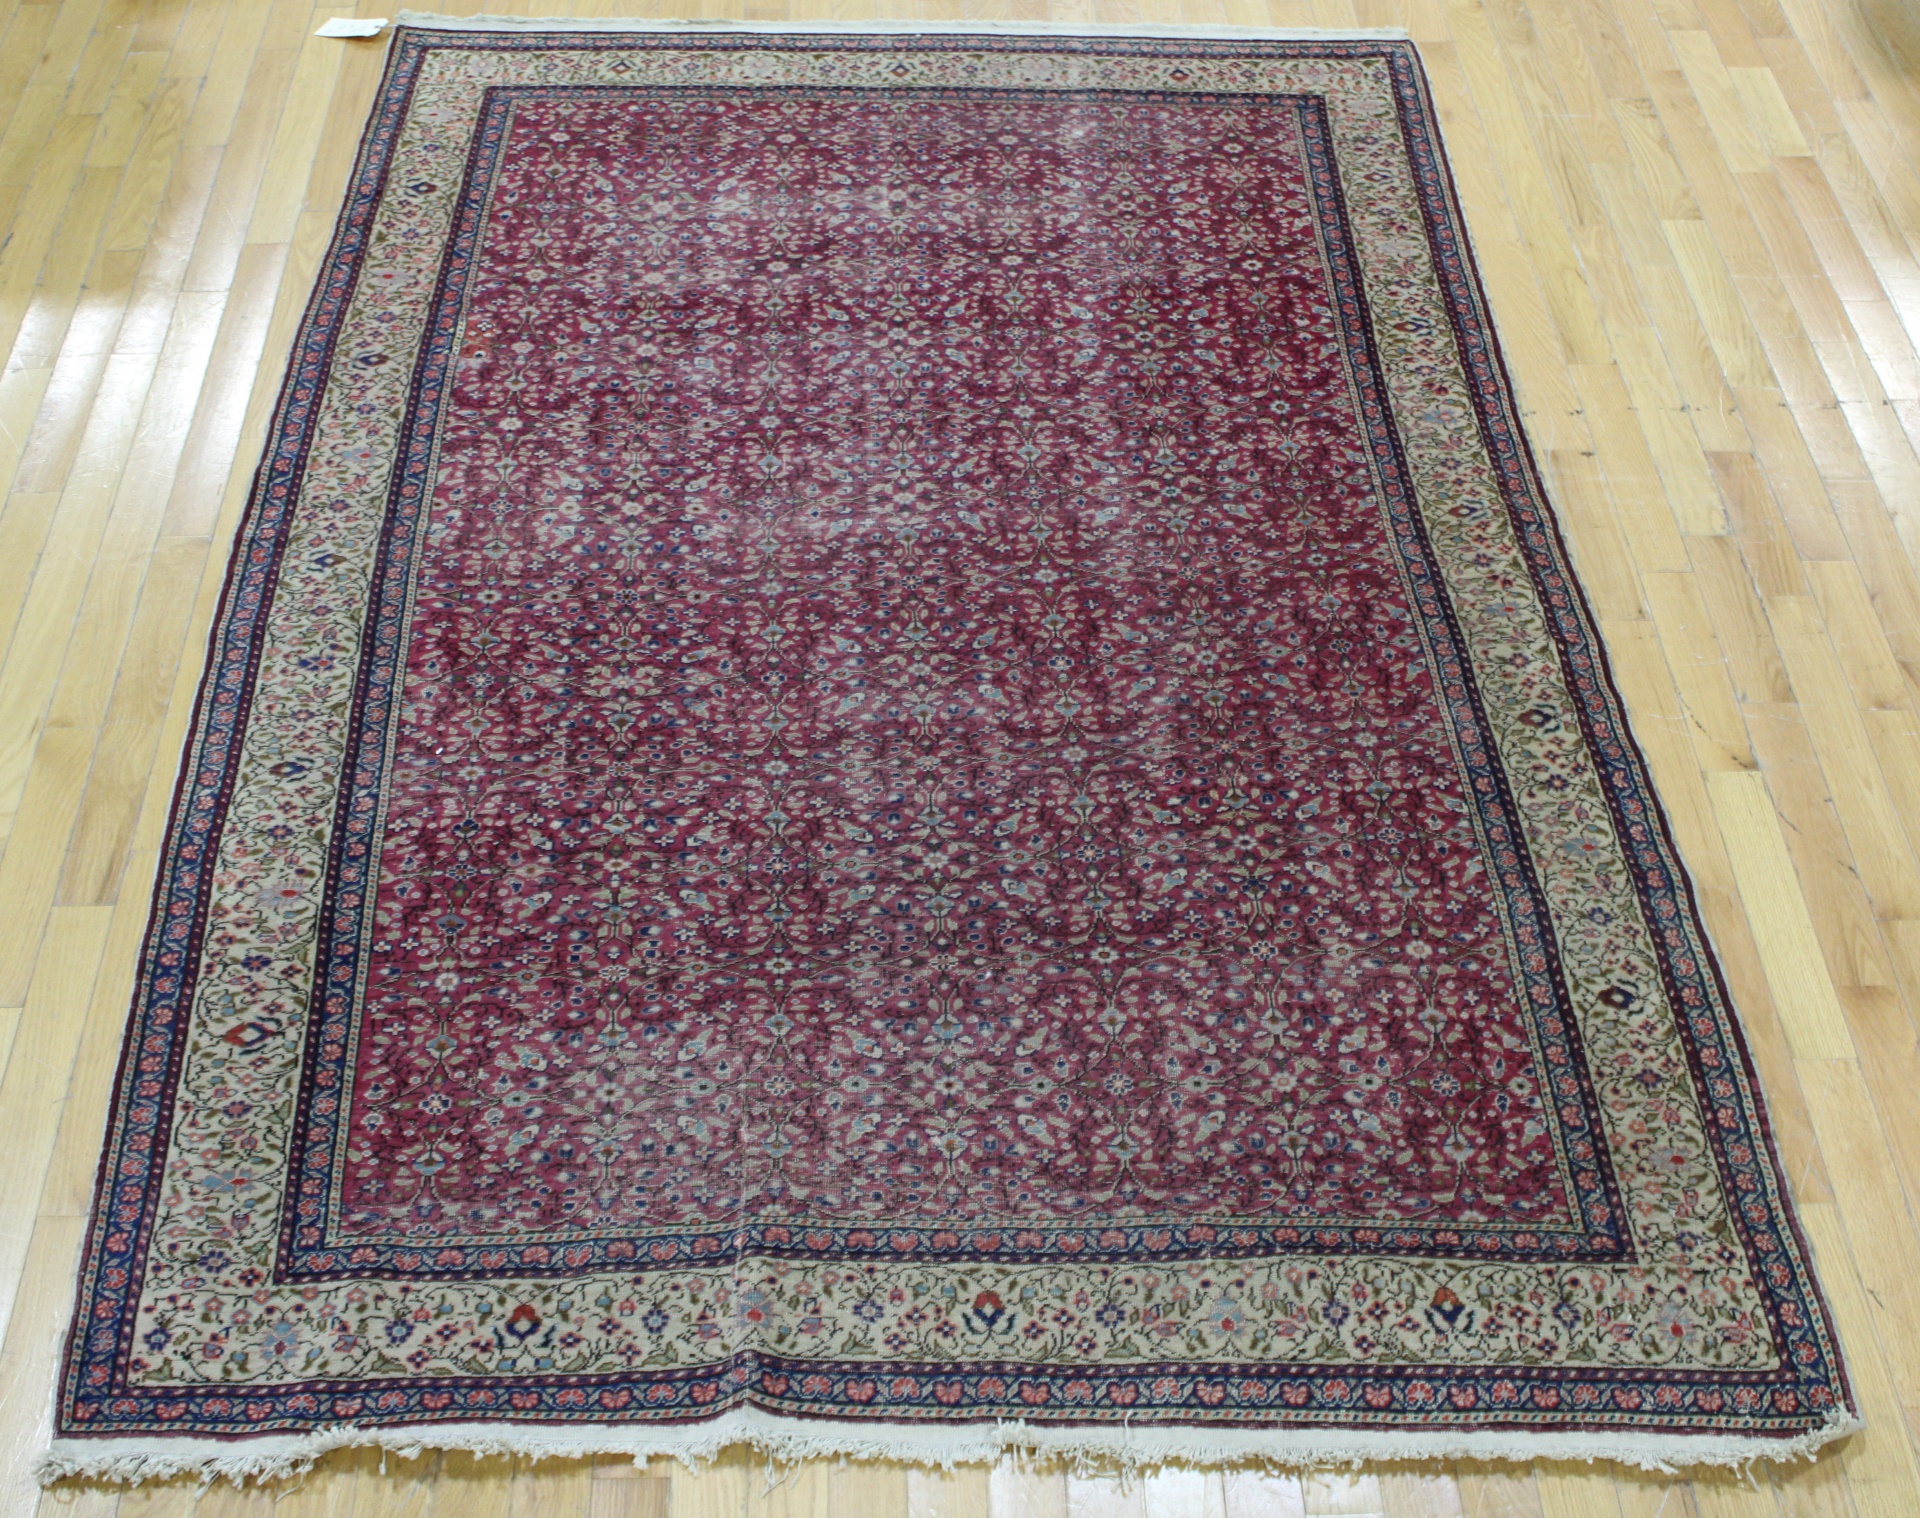 ANTIQUE AND FINELY HAND WOVEN CARPET  3b7ecf